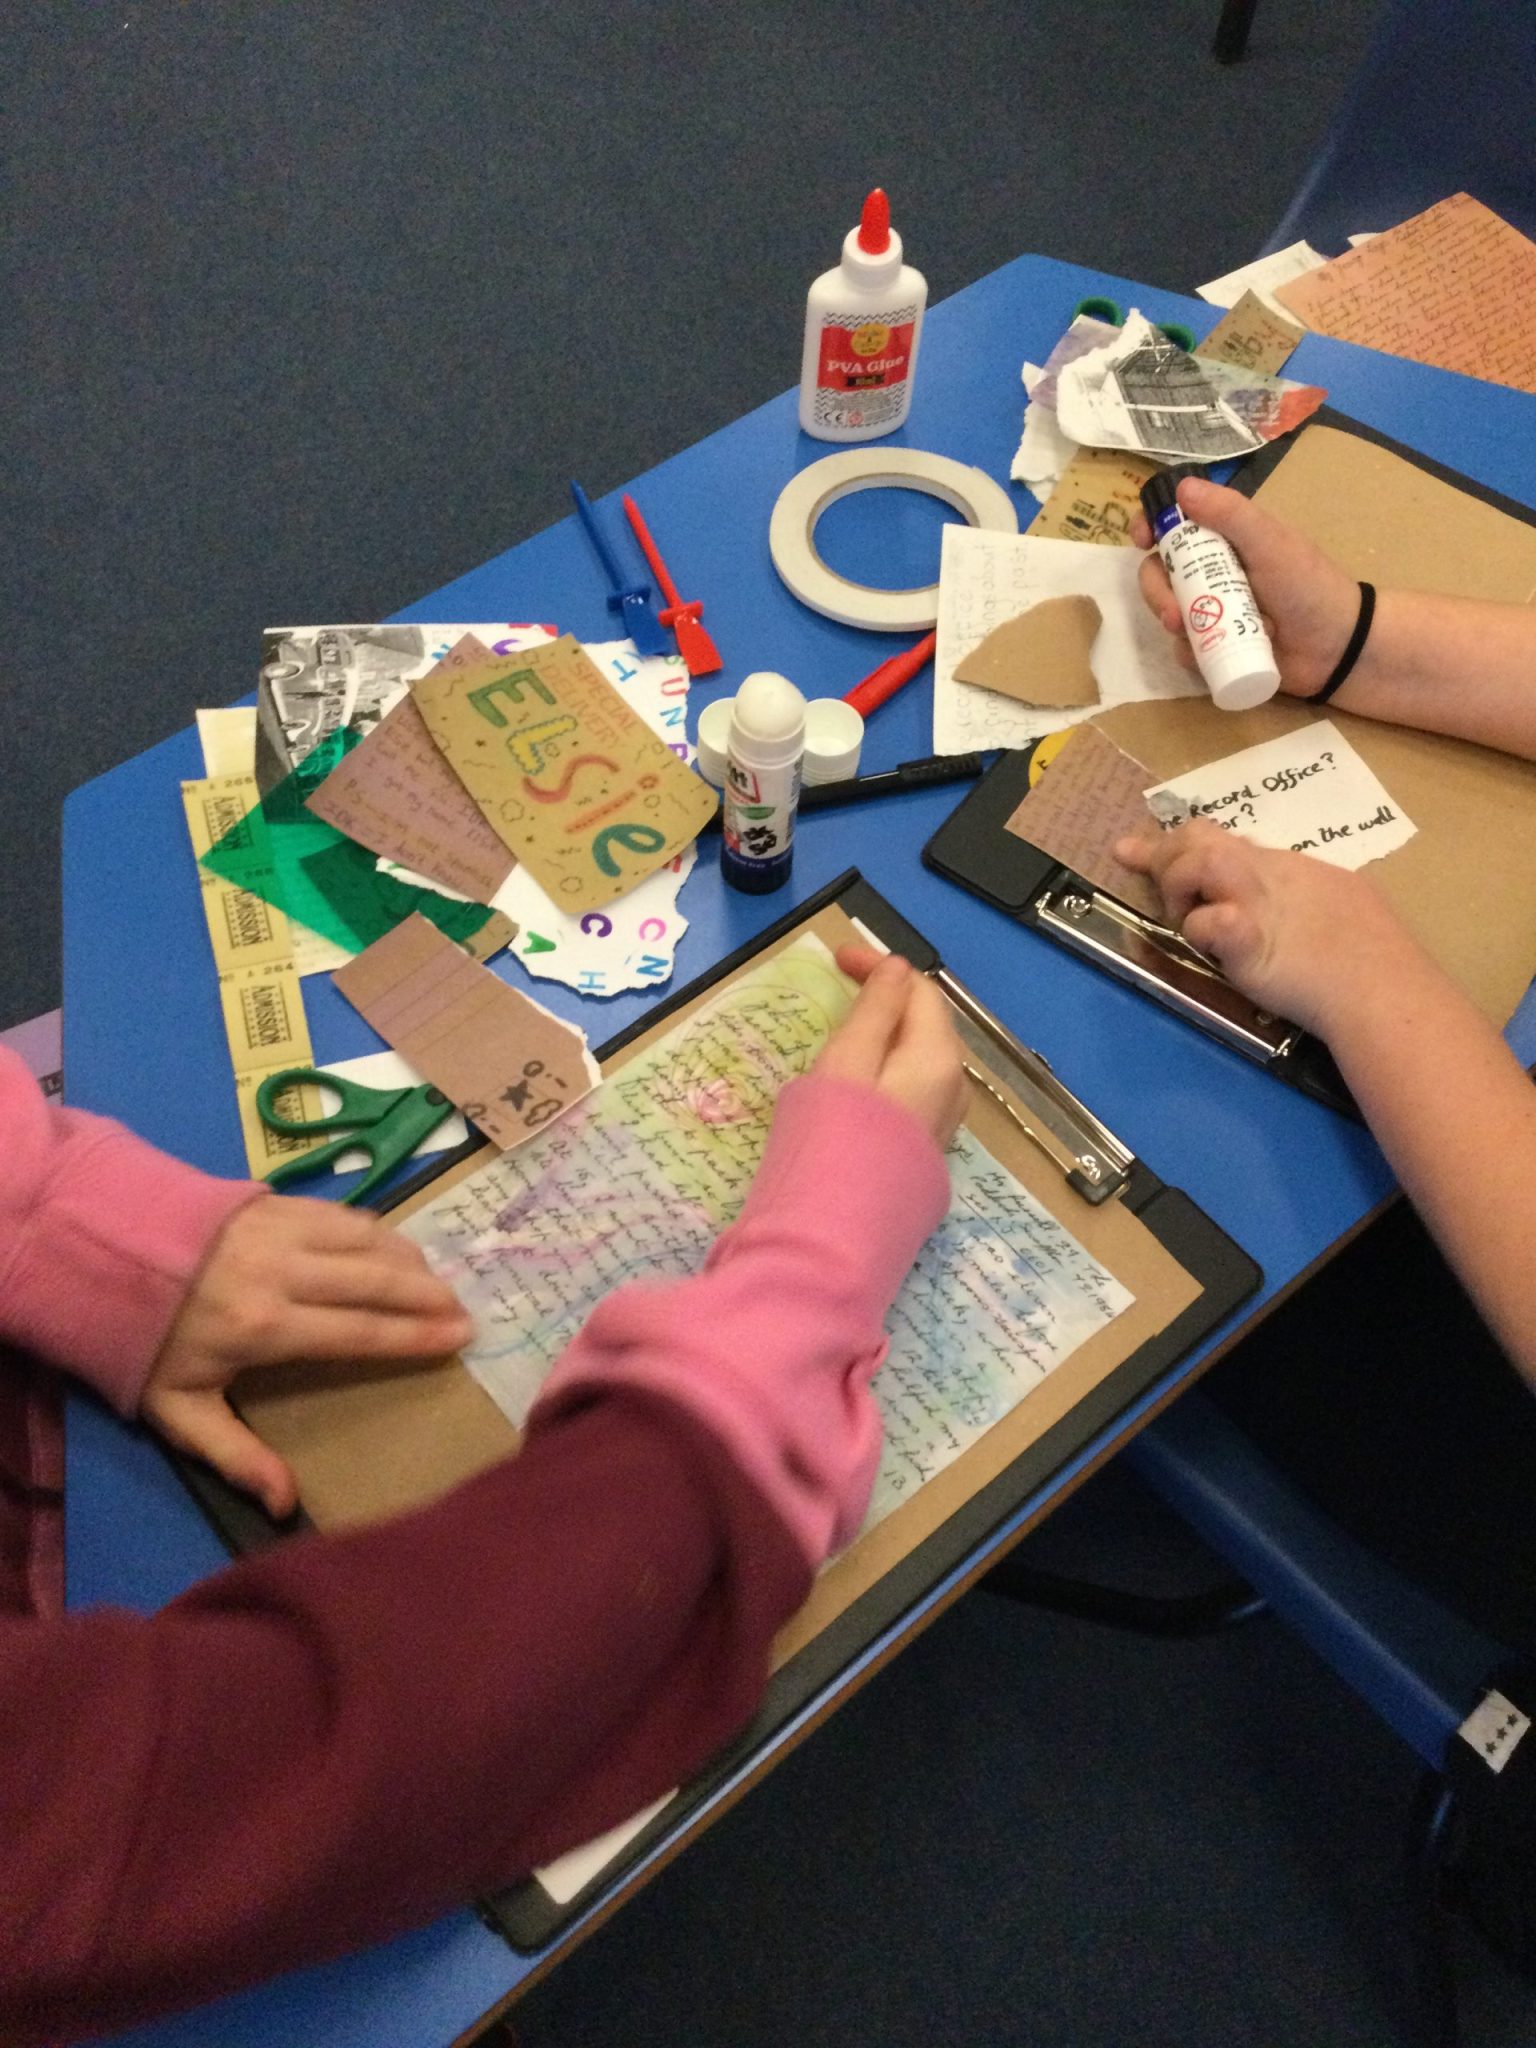 Children sticking down various cards and letters to create their collages